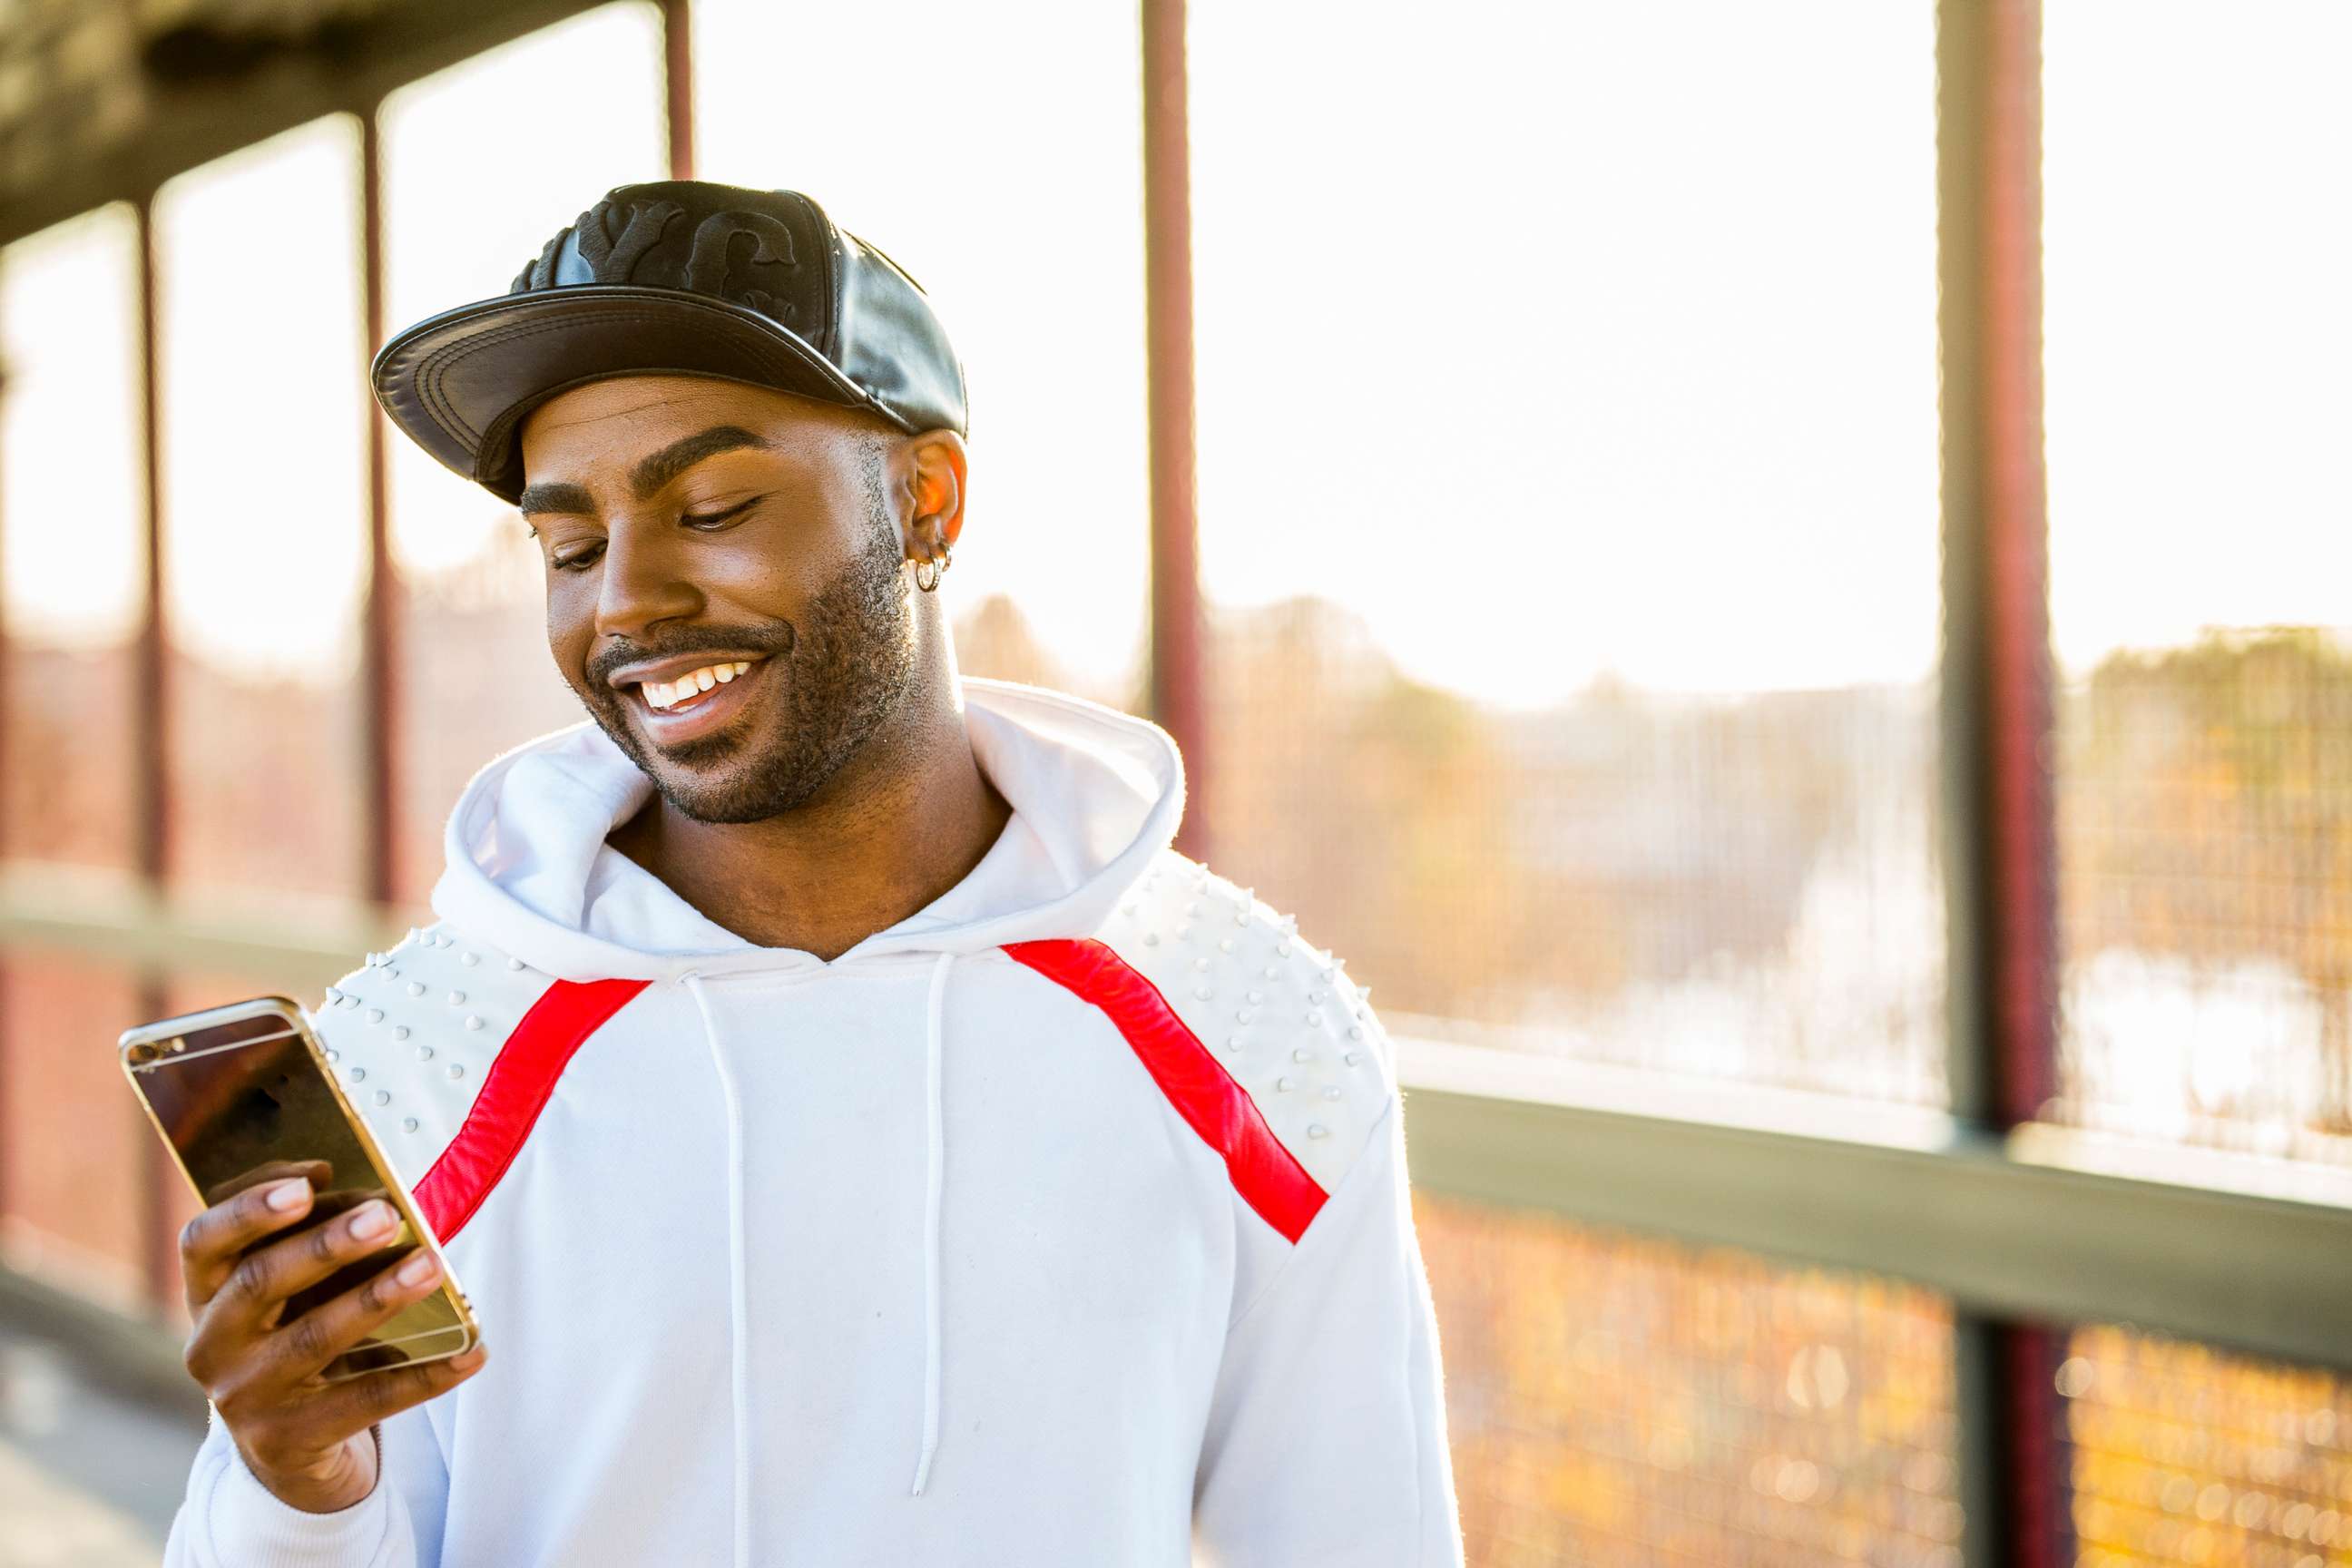 PHOTO: A man smiles as he uses his cell phone in this undated stock photo.